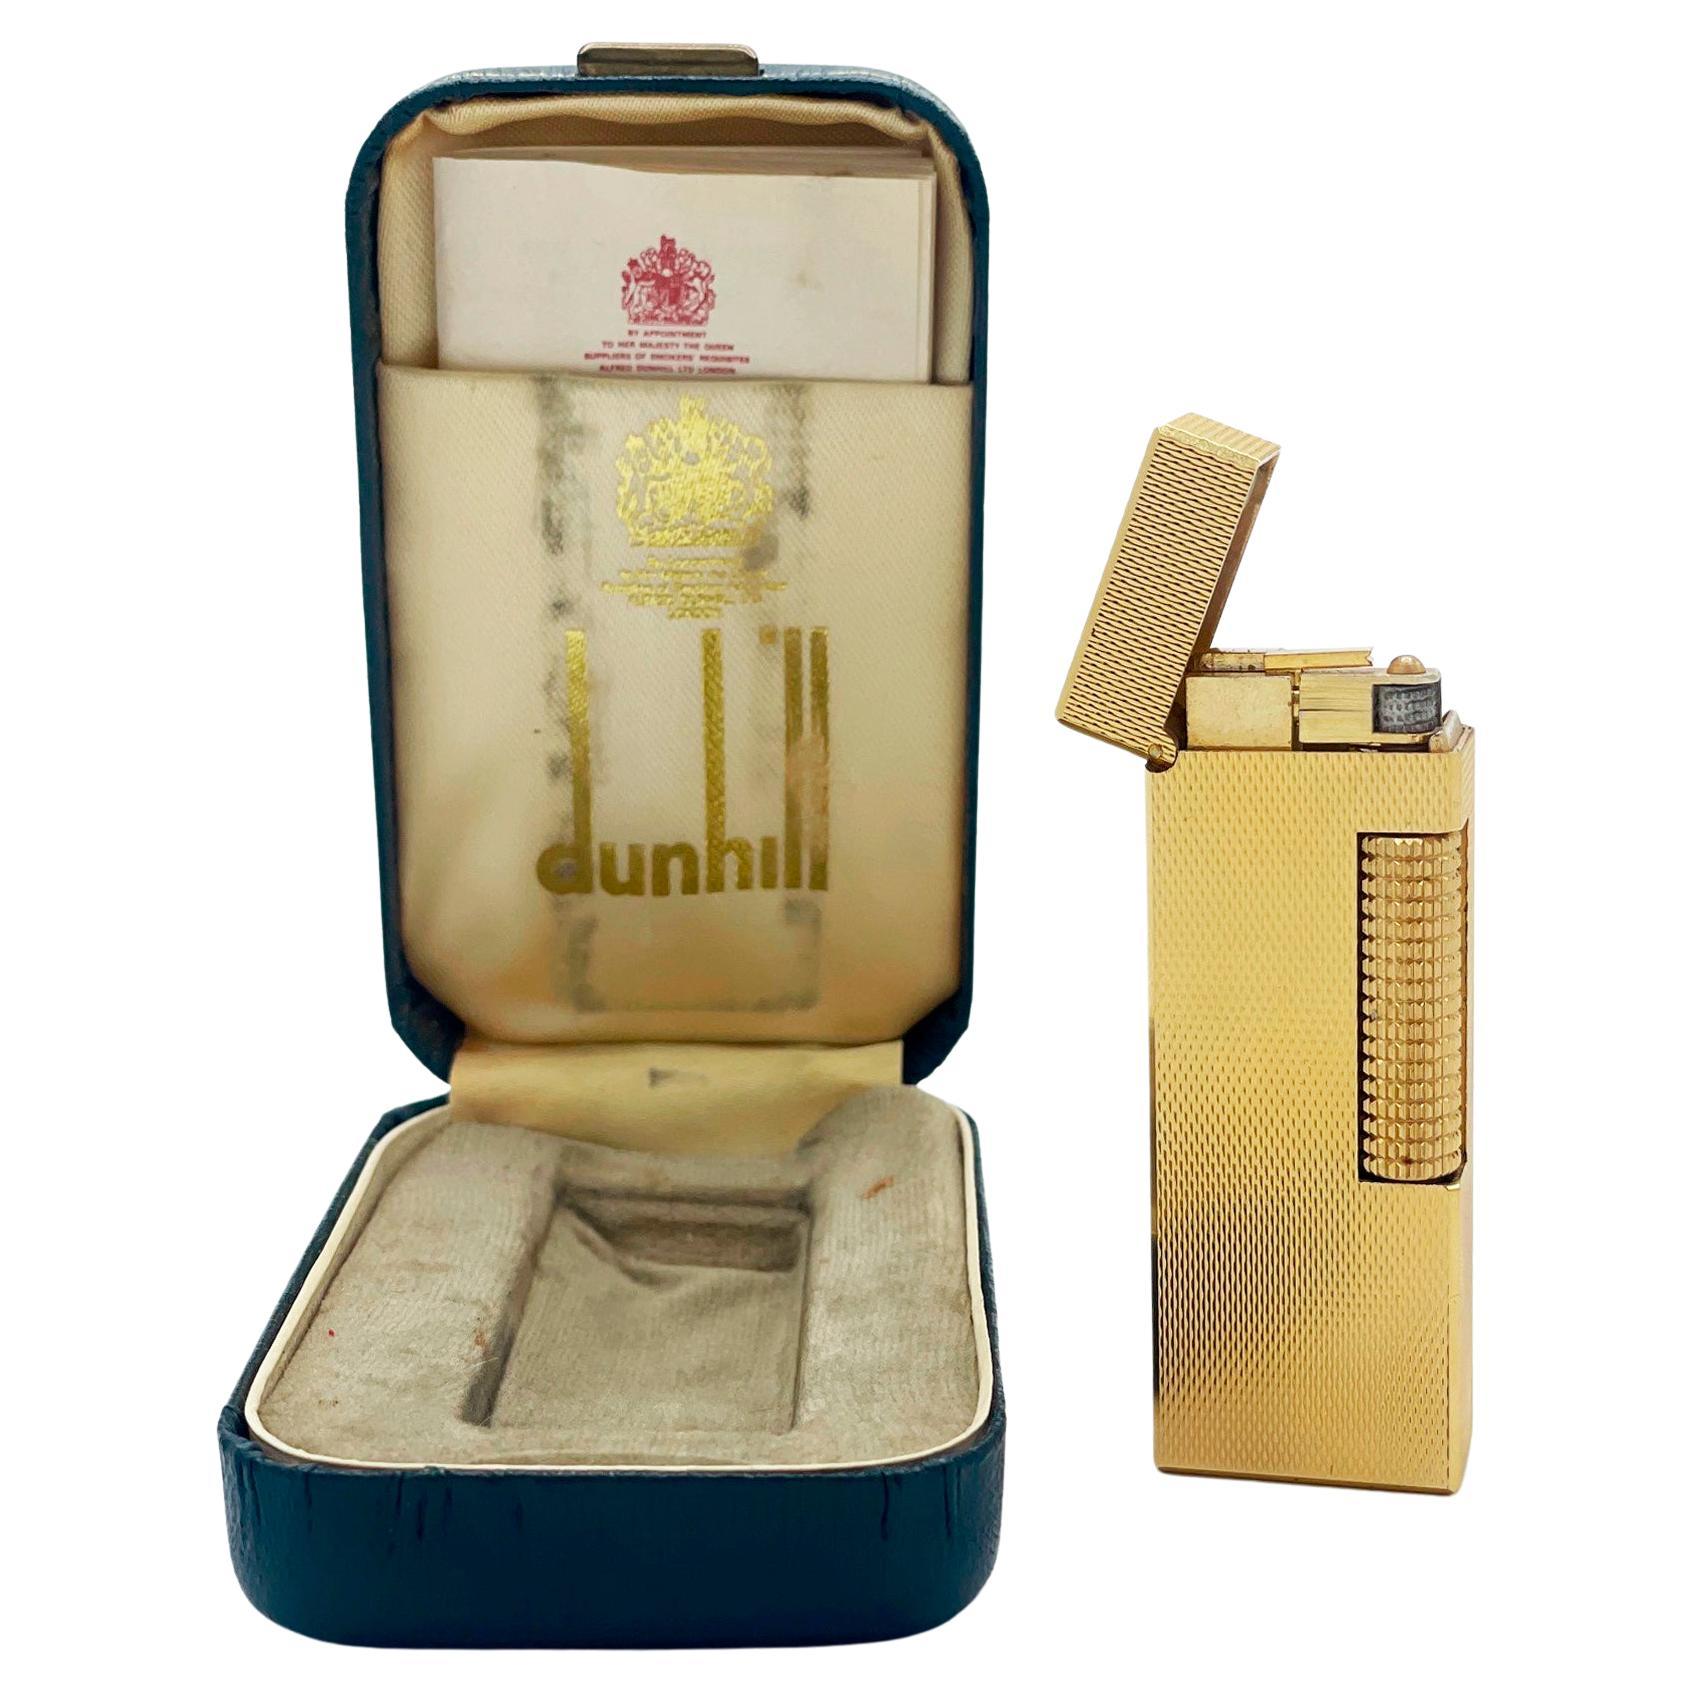 The James Bond Iconic and Rare Vintage Dunhill Gold and Swiss Made Lighter